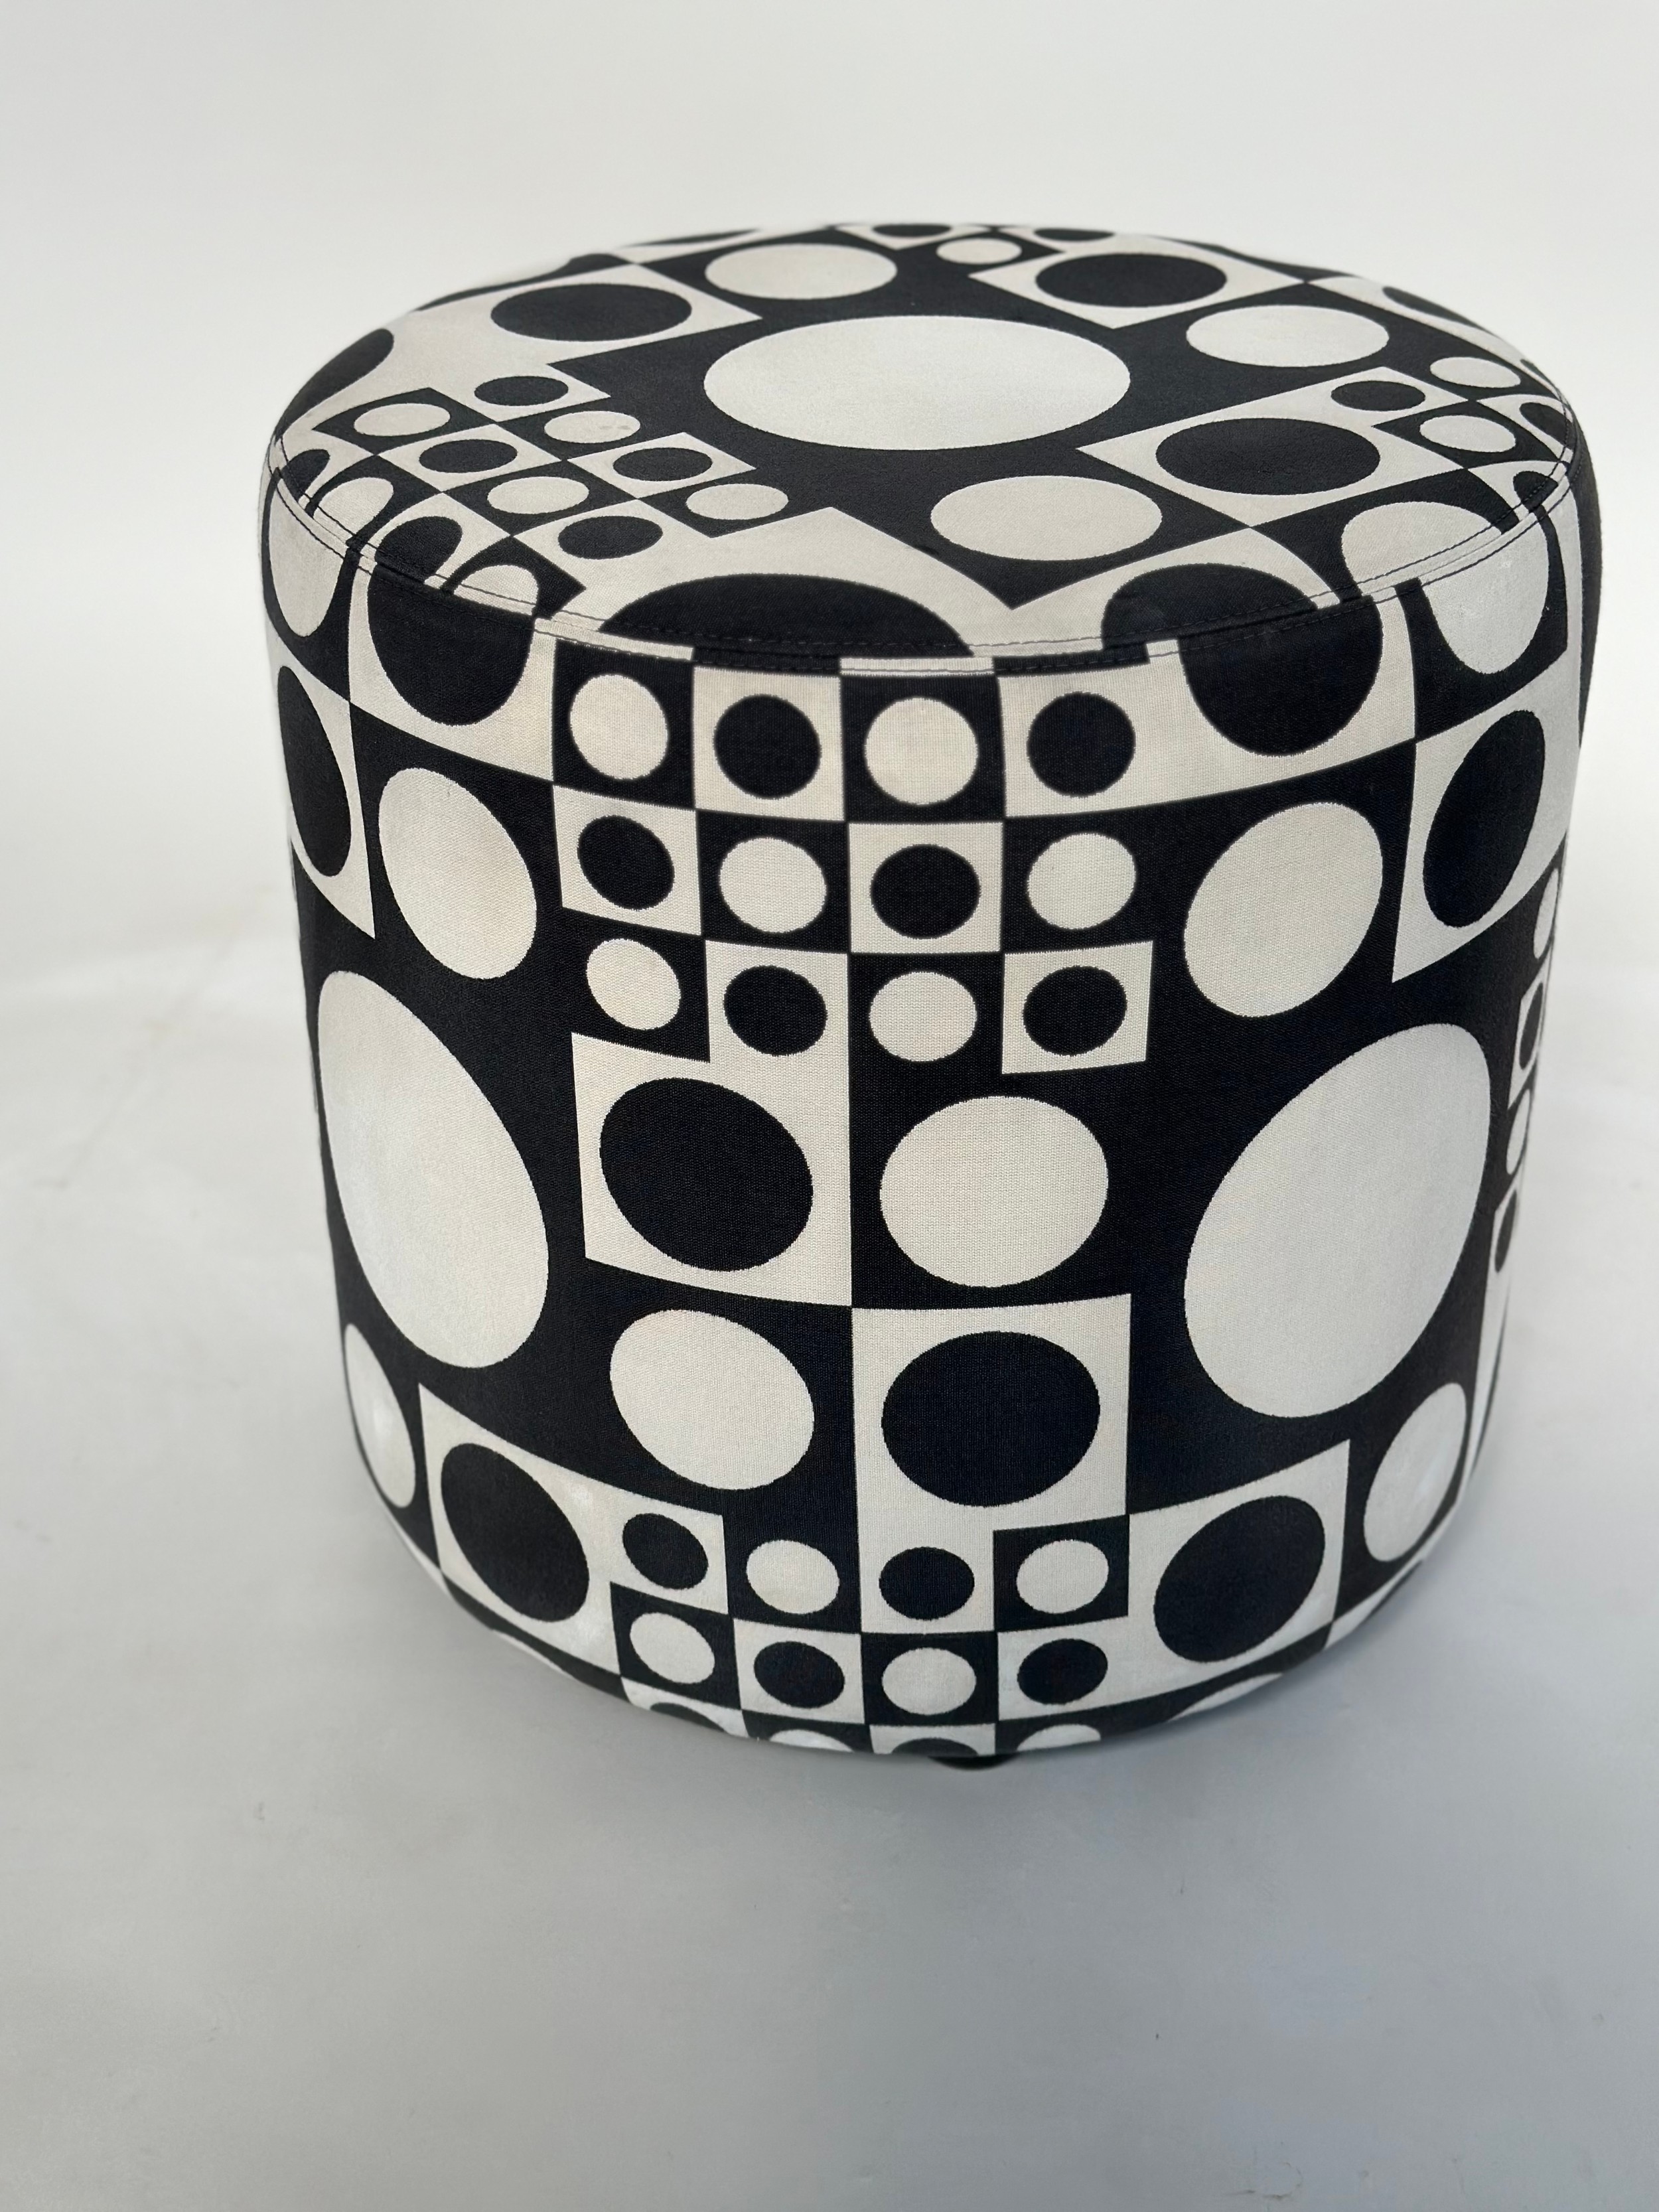 STOOL BY JOHANSON DESIGN, circular drum form with black/white 60s style fabric upholstery, 44cm W